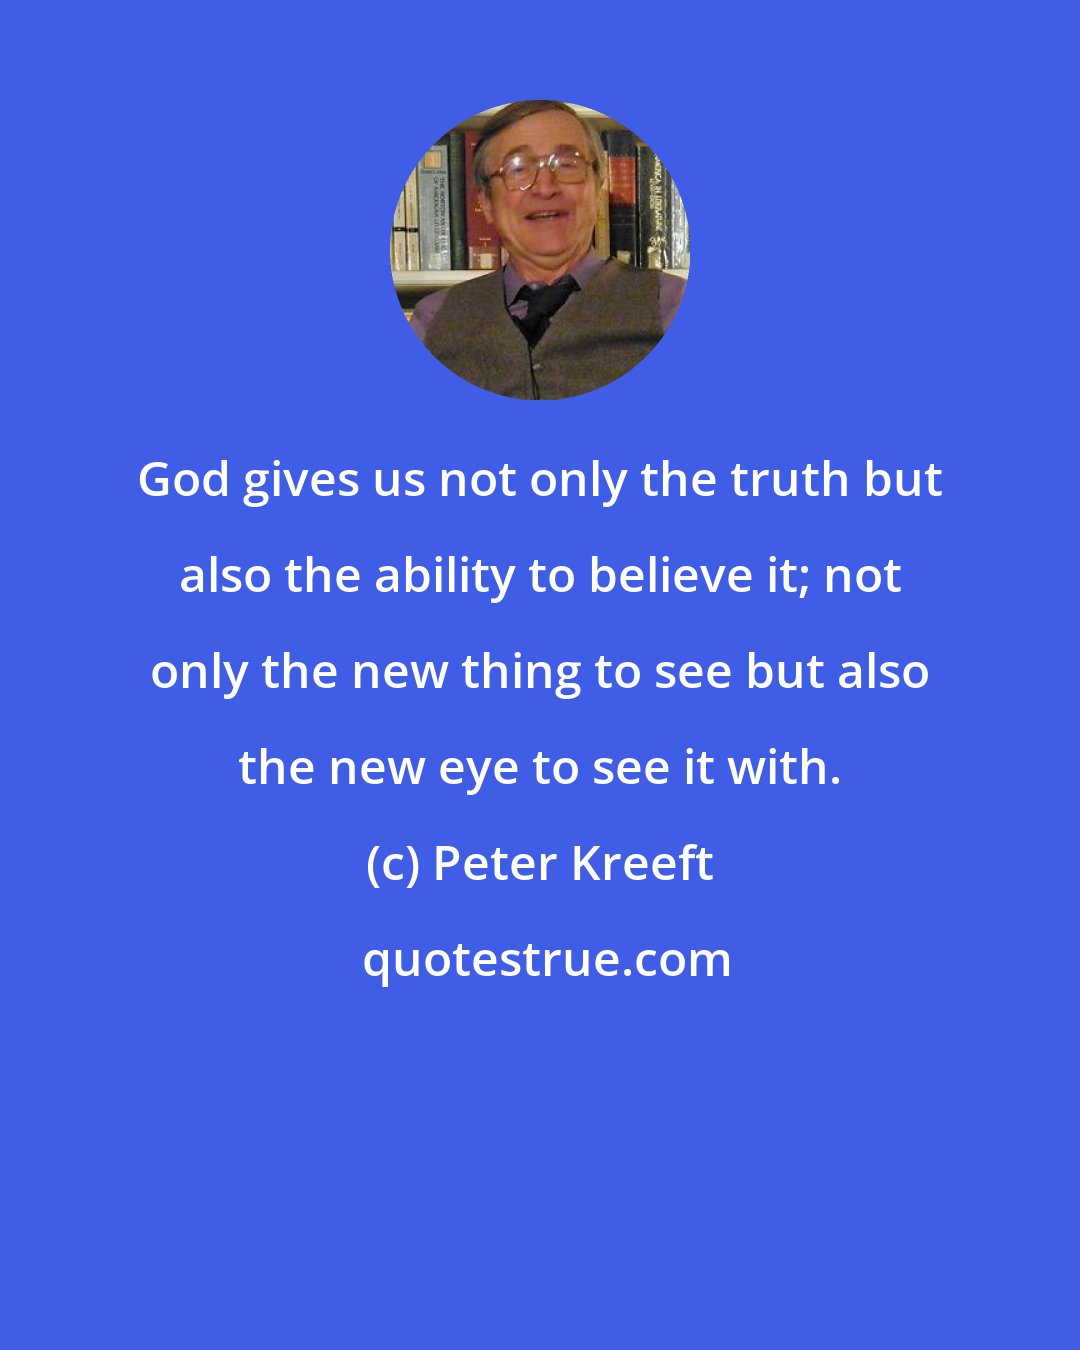 Peter Kreeft: God gives us not only the truth but also the ability to believe it; not only the new thing to see but also the new eye to see it with.